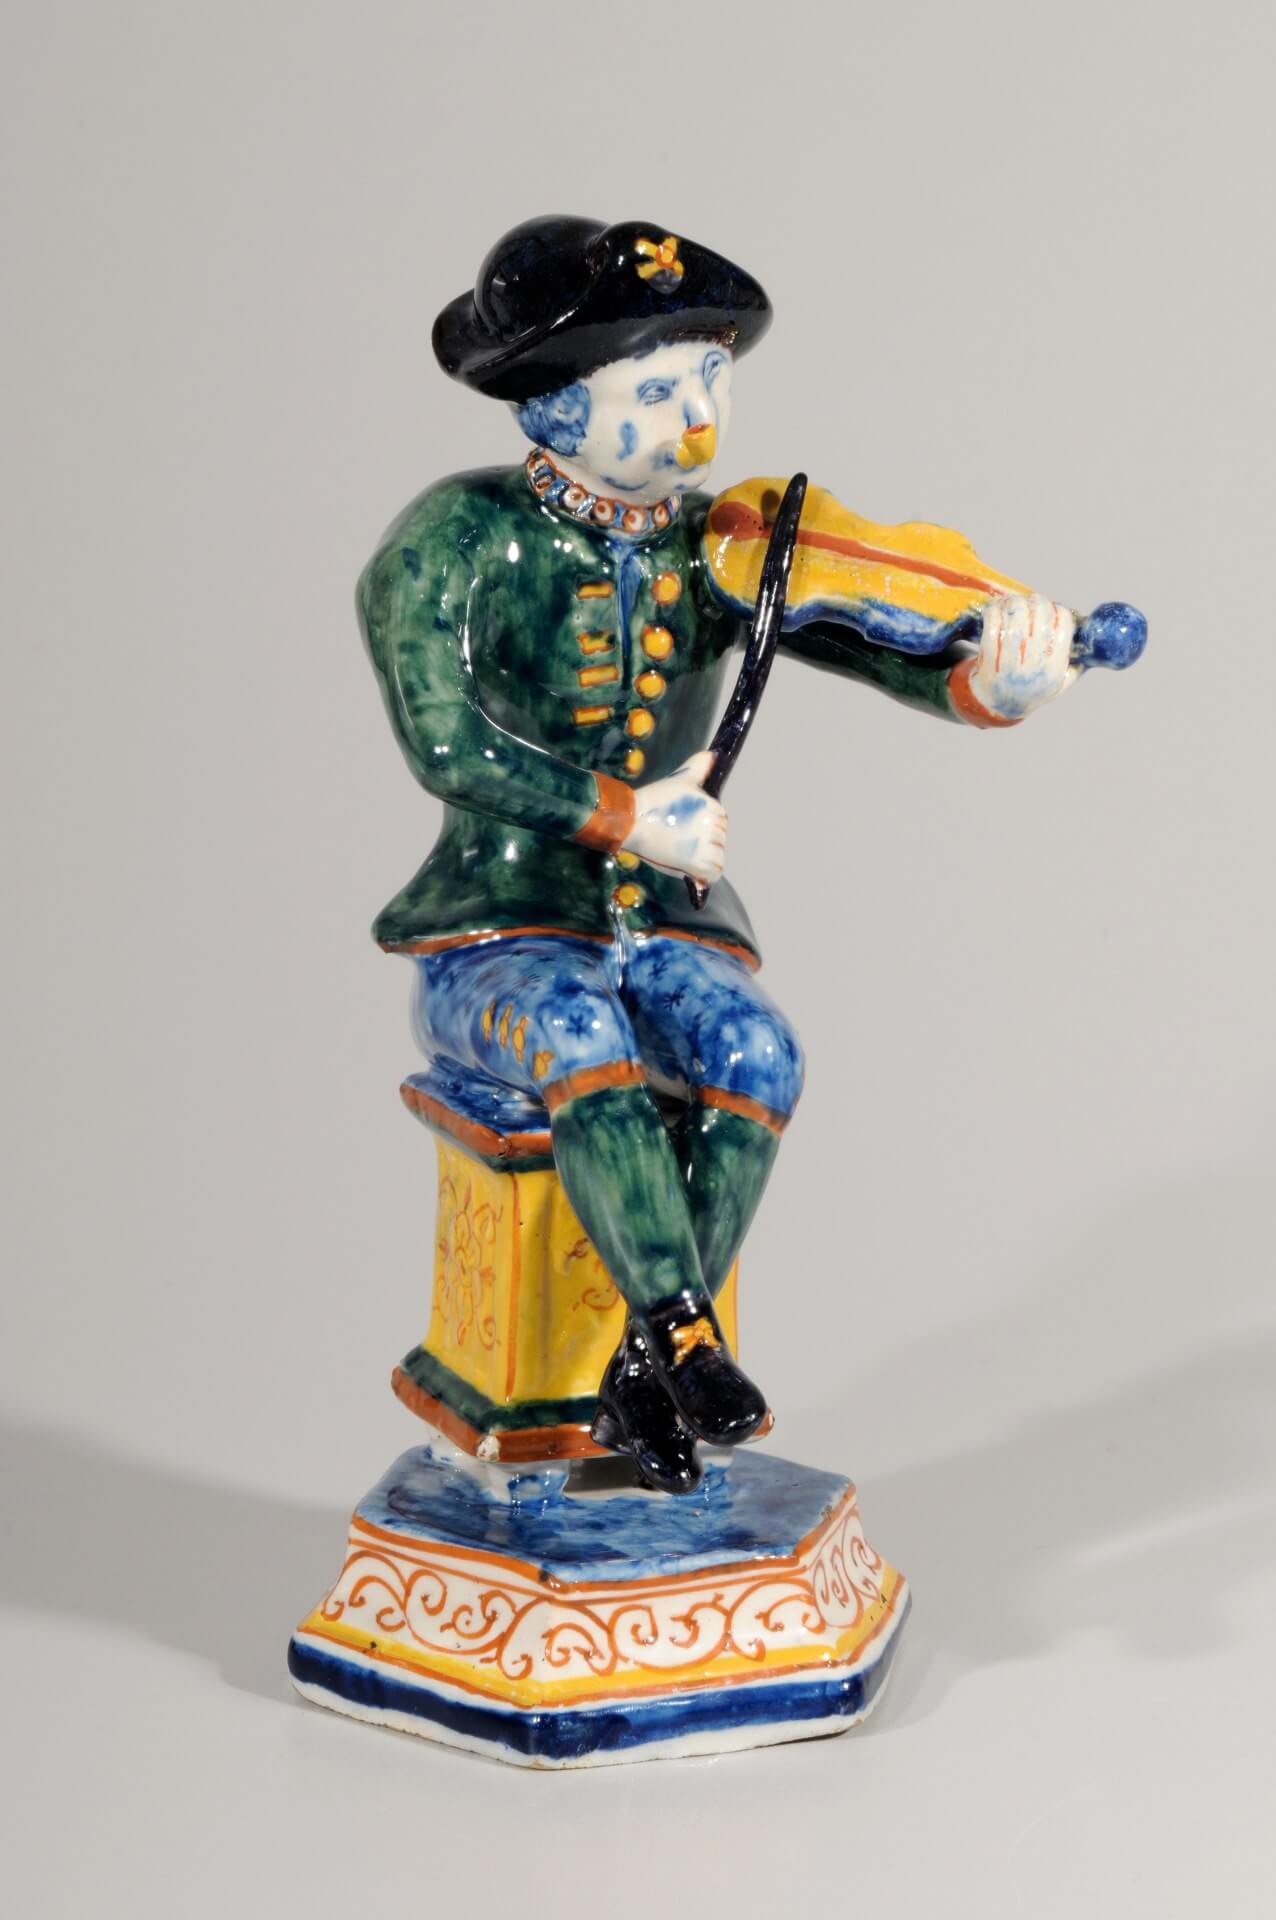 Ceramic Delft pottery figurine of man playing violin in polychrome colours